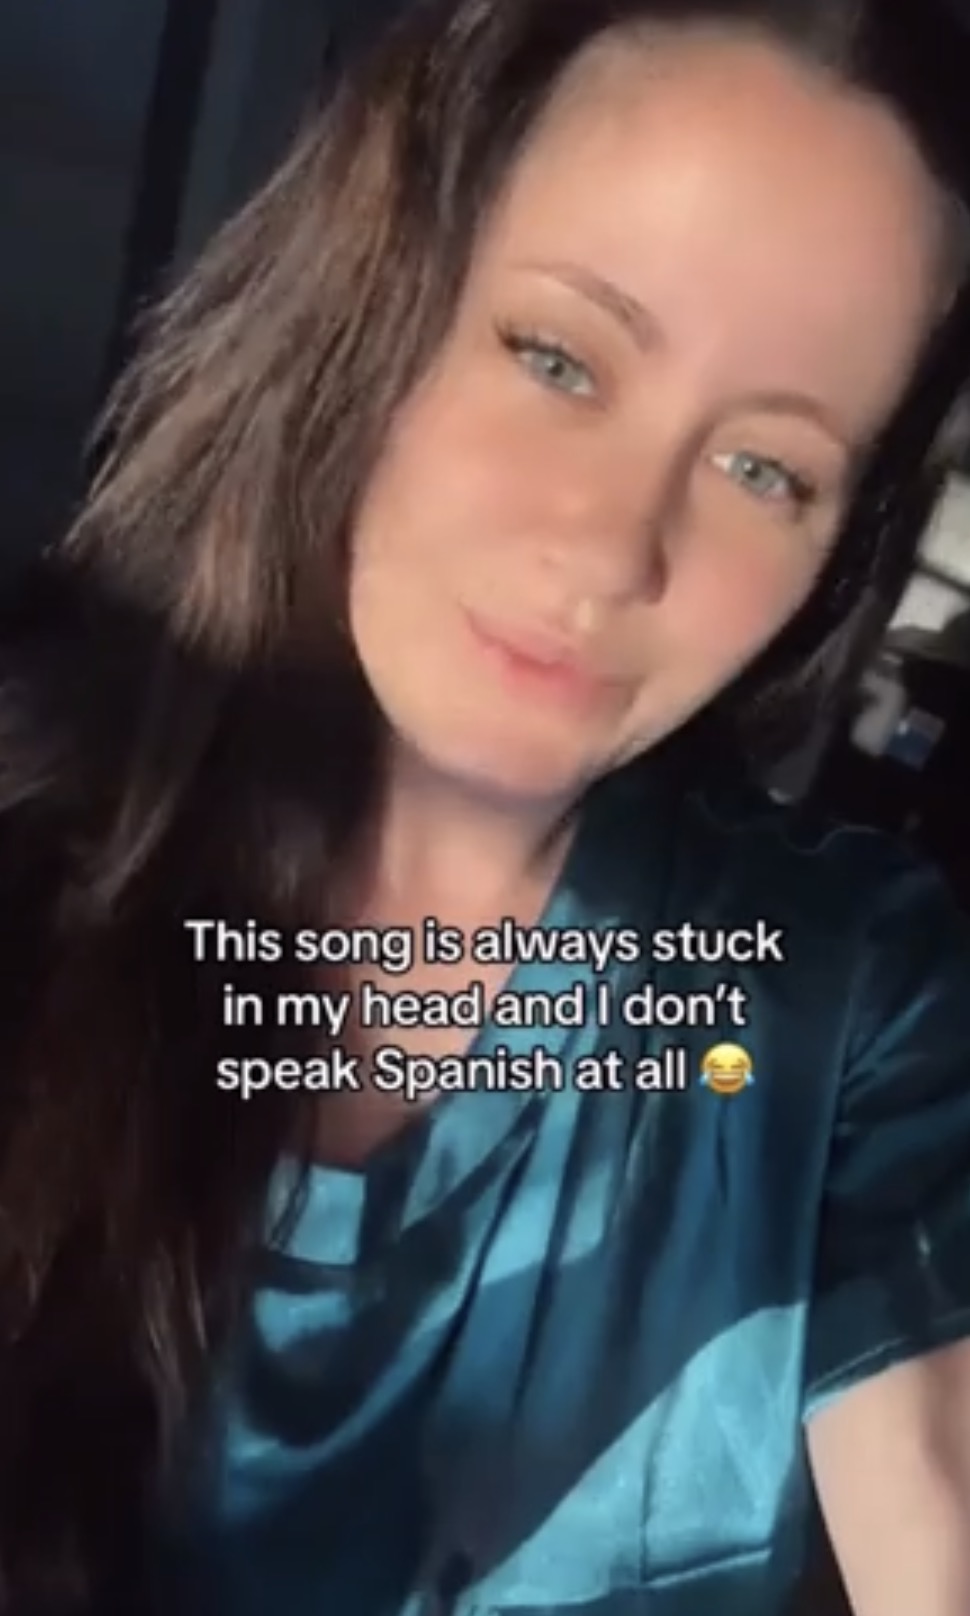 Jenelle posted from the front seat of a car